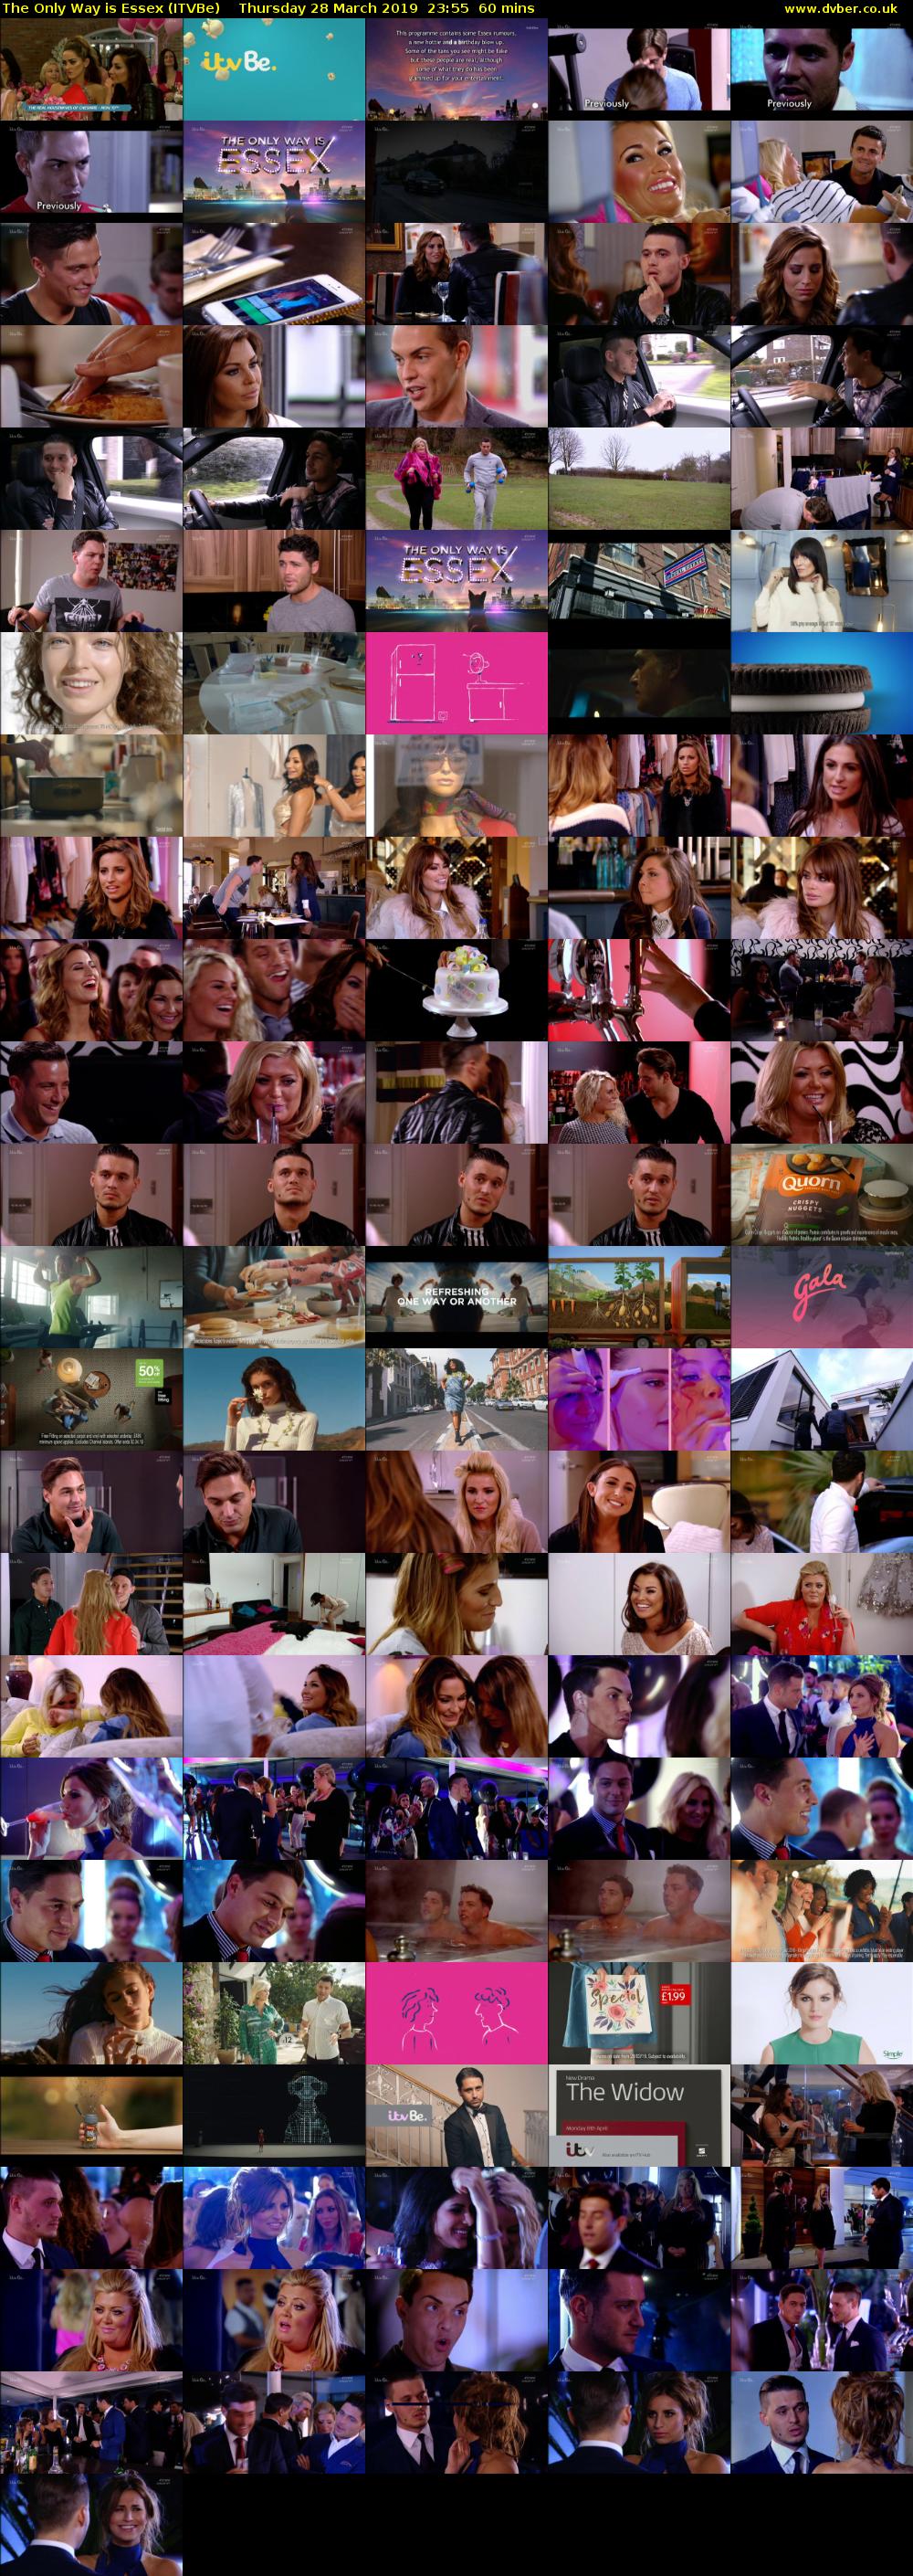 The Only Way is Essex (ITVBe) Thursday 28 March 2019 23:55 - 00:55